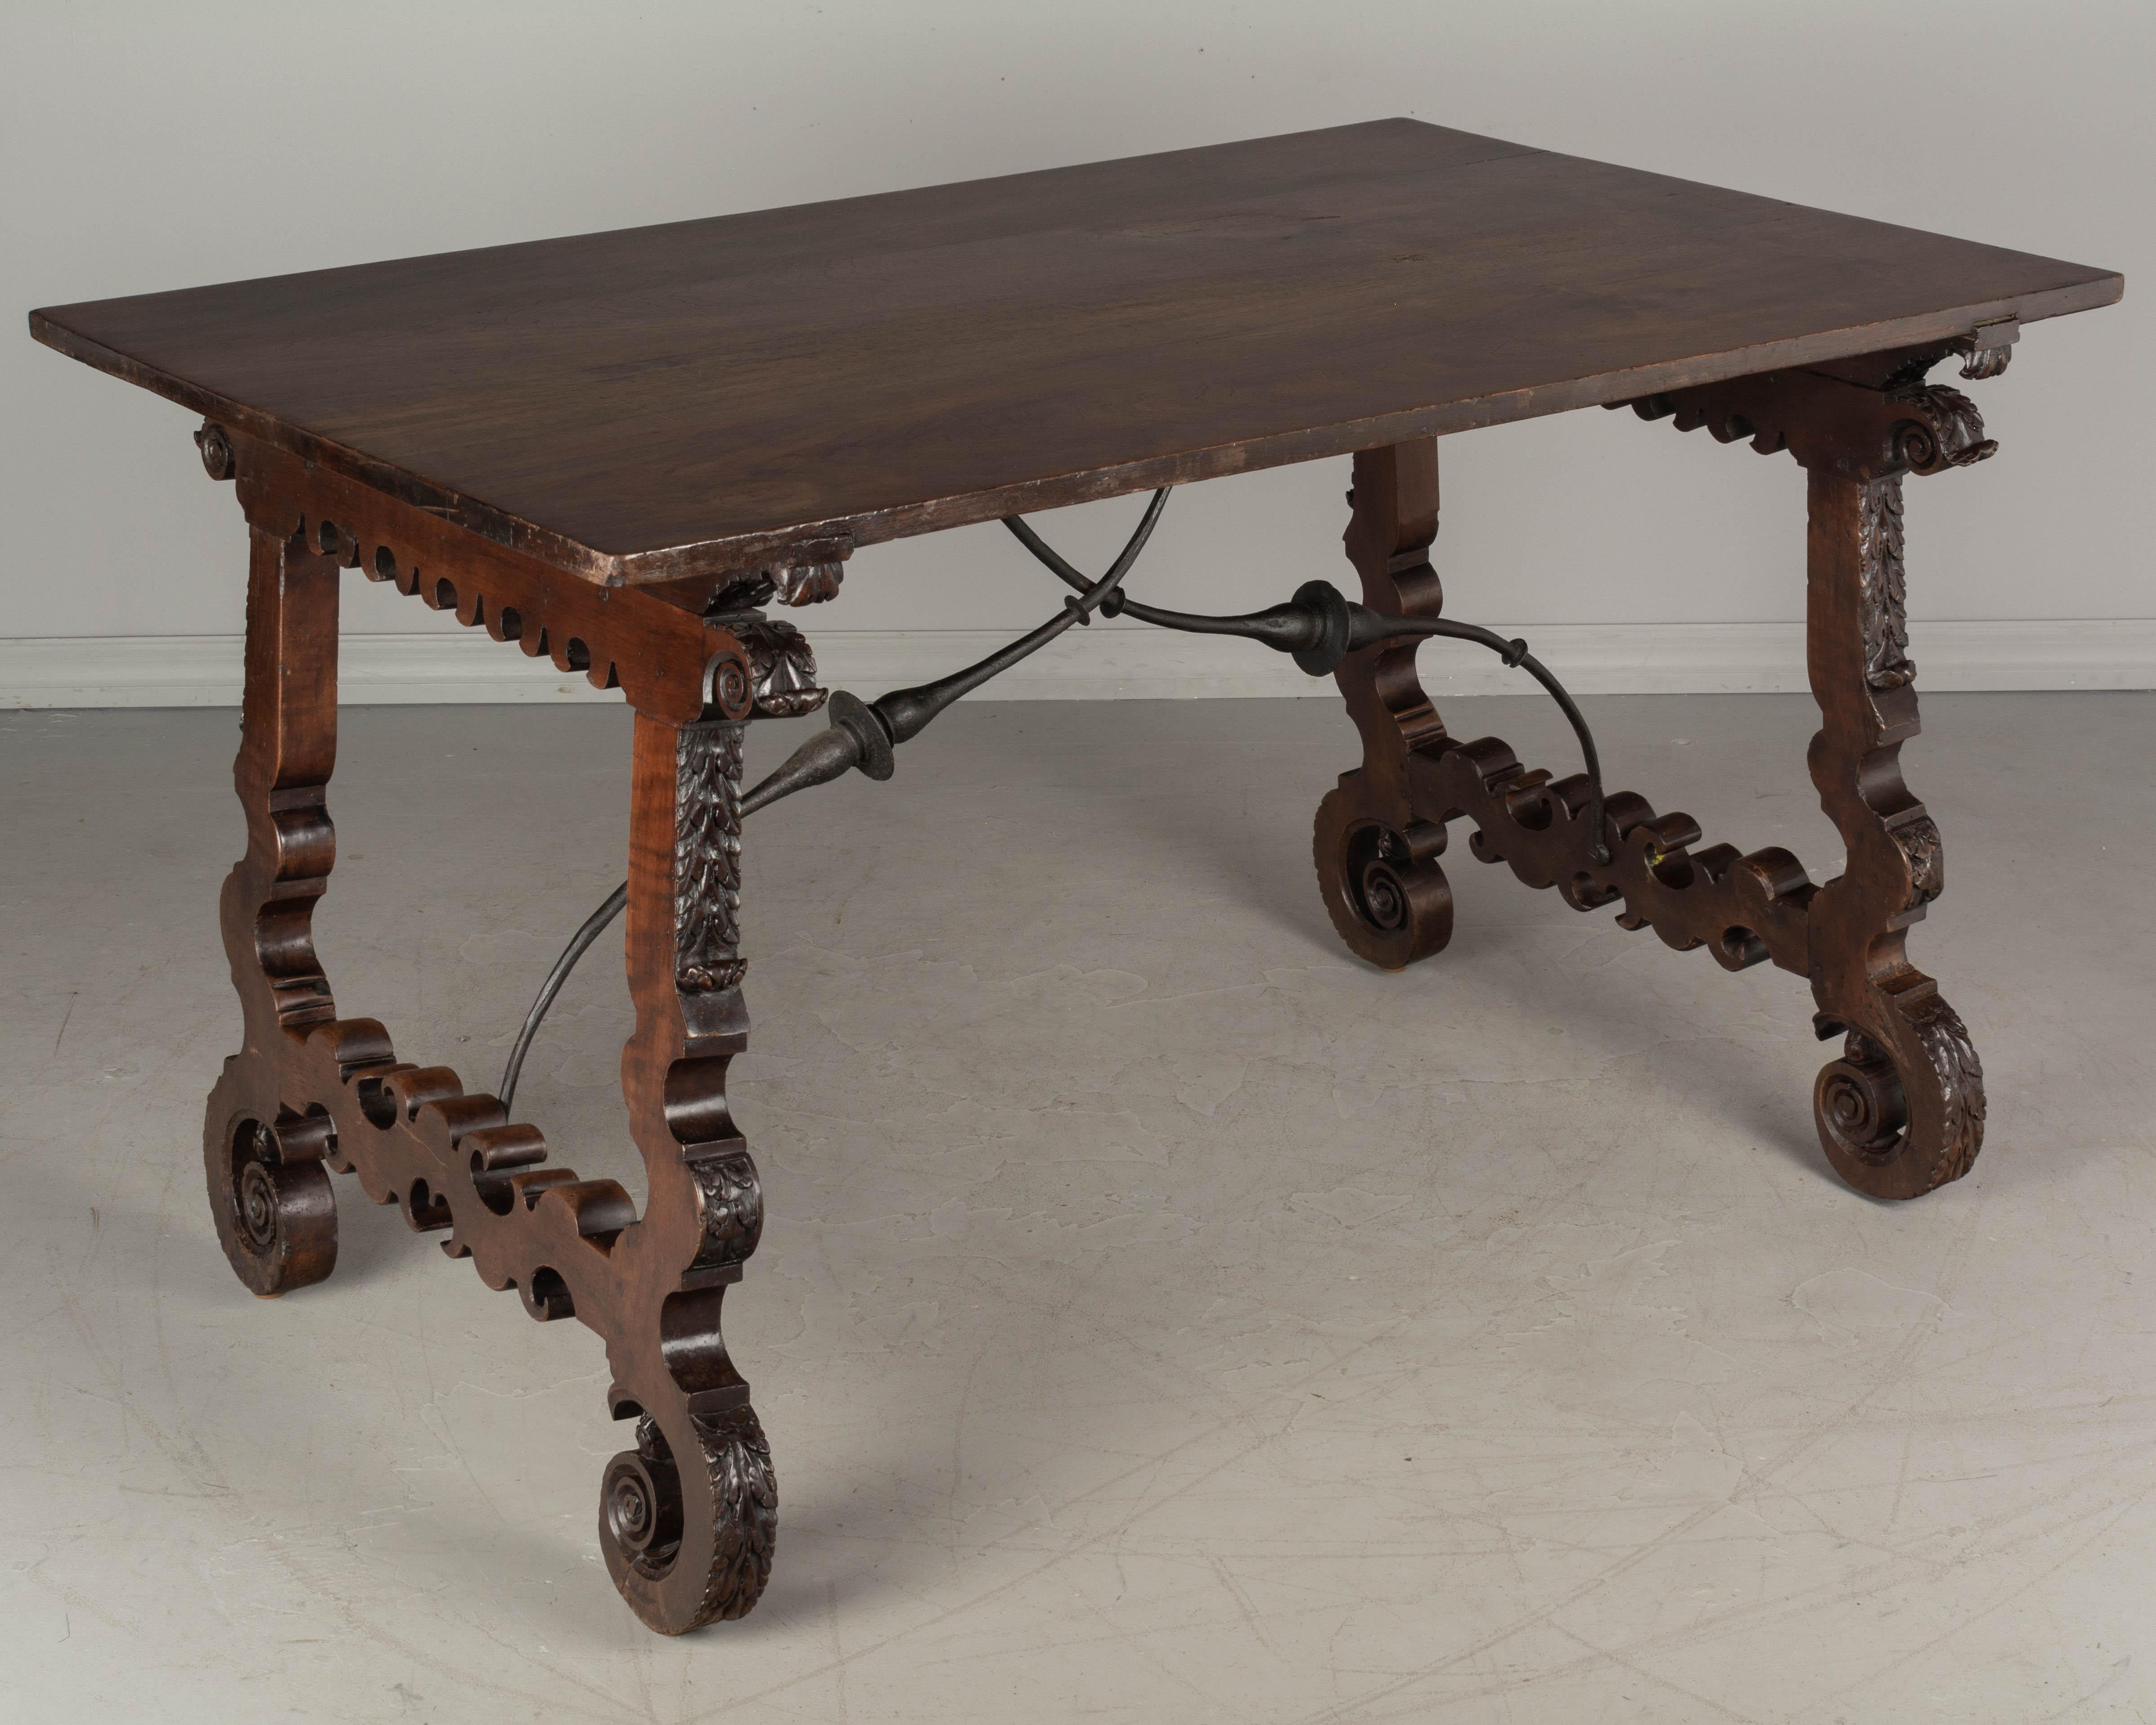 A Spanish Baroque style center table made of solid walnut with lyre shaped legs joined by forged iron stretchers. The top is made has a beautifully patterned wood grain and is made from book matched veneer of walnut. The legs have elaborate cut-out